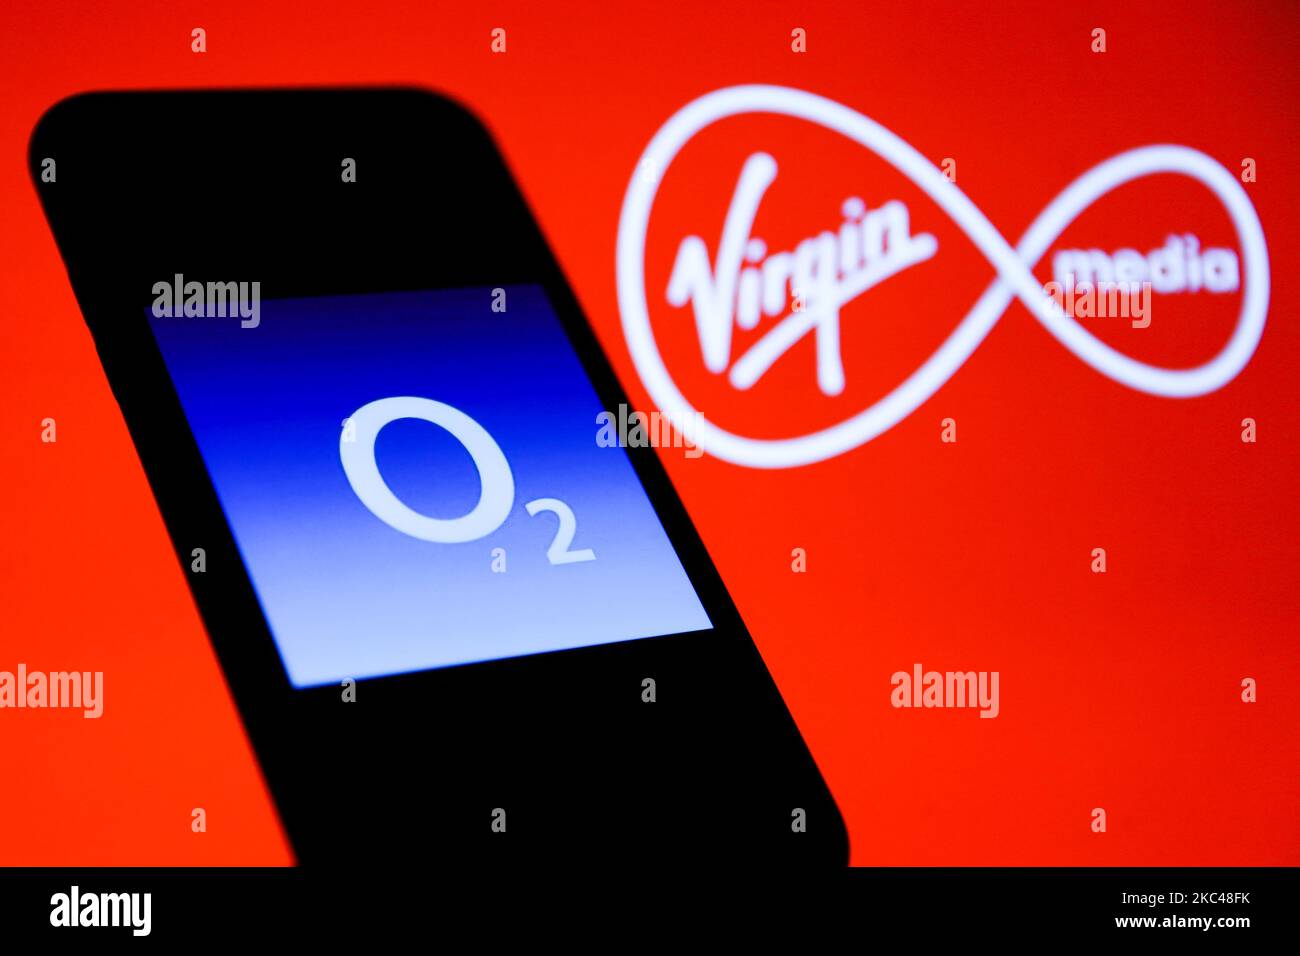 O2 logo is seen displayed on a phone screen with Virgin Media logo displayed on the background in this illustration photo taken in Poland on November 19, 2020. (Photo by Jakub Porzycki/NurPhoto) Stock Photo